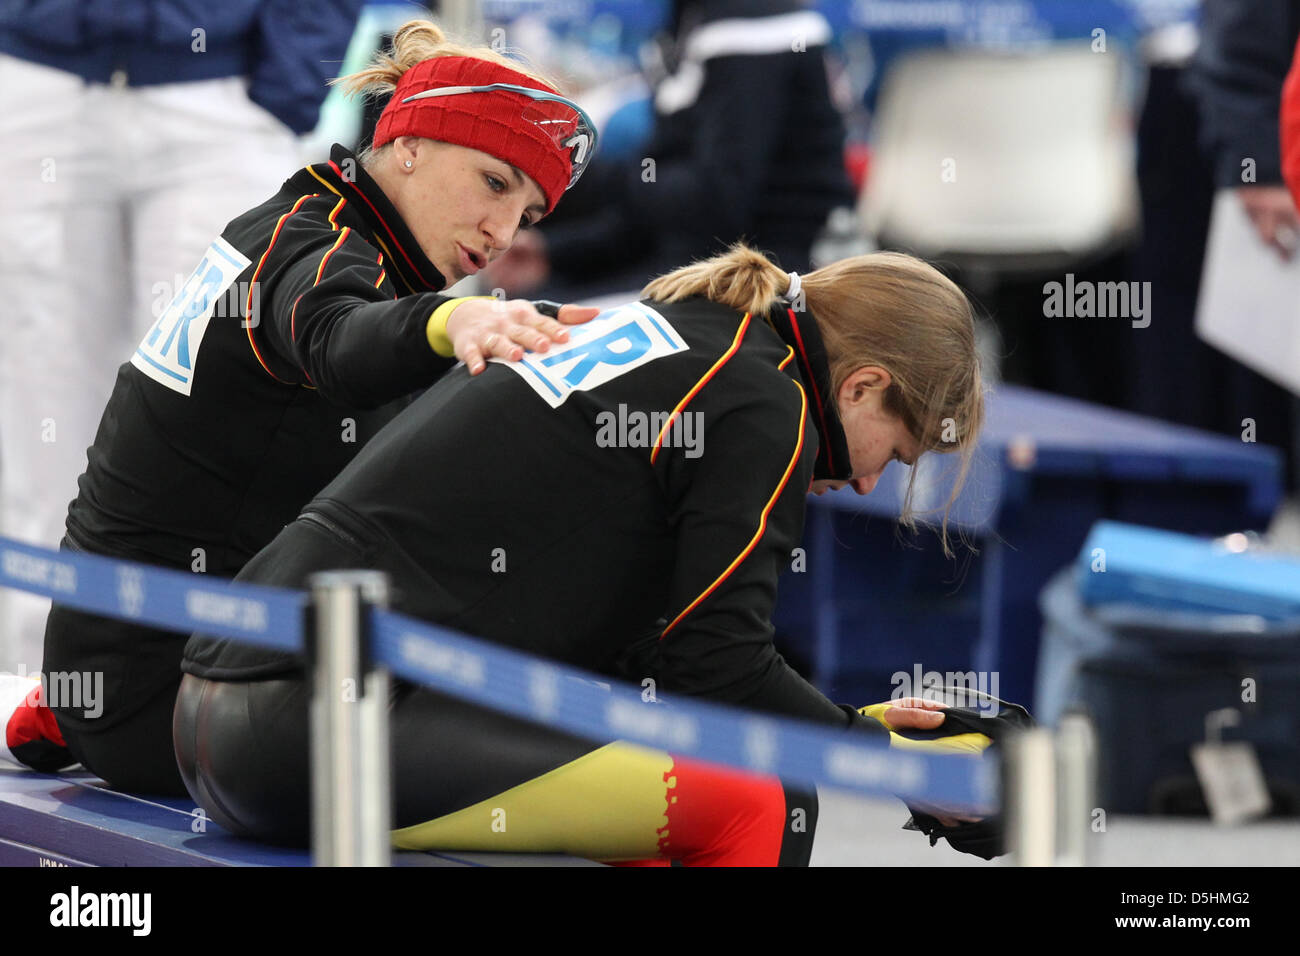 Anni Friesinger-Postma (L) of Germany talks to team mate Jenny Wolf during the Speed Skating women's 1000m at the Richmond Olympic Oval during the Vancouver 2010 Olympic Games, Vancouver, Canada, 18 February 2010.  +++(c) dpa - Bildfunk+++ Stock Photo